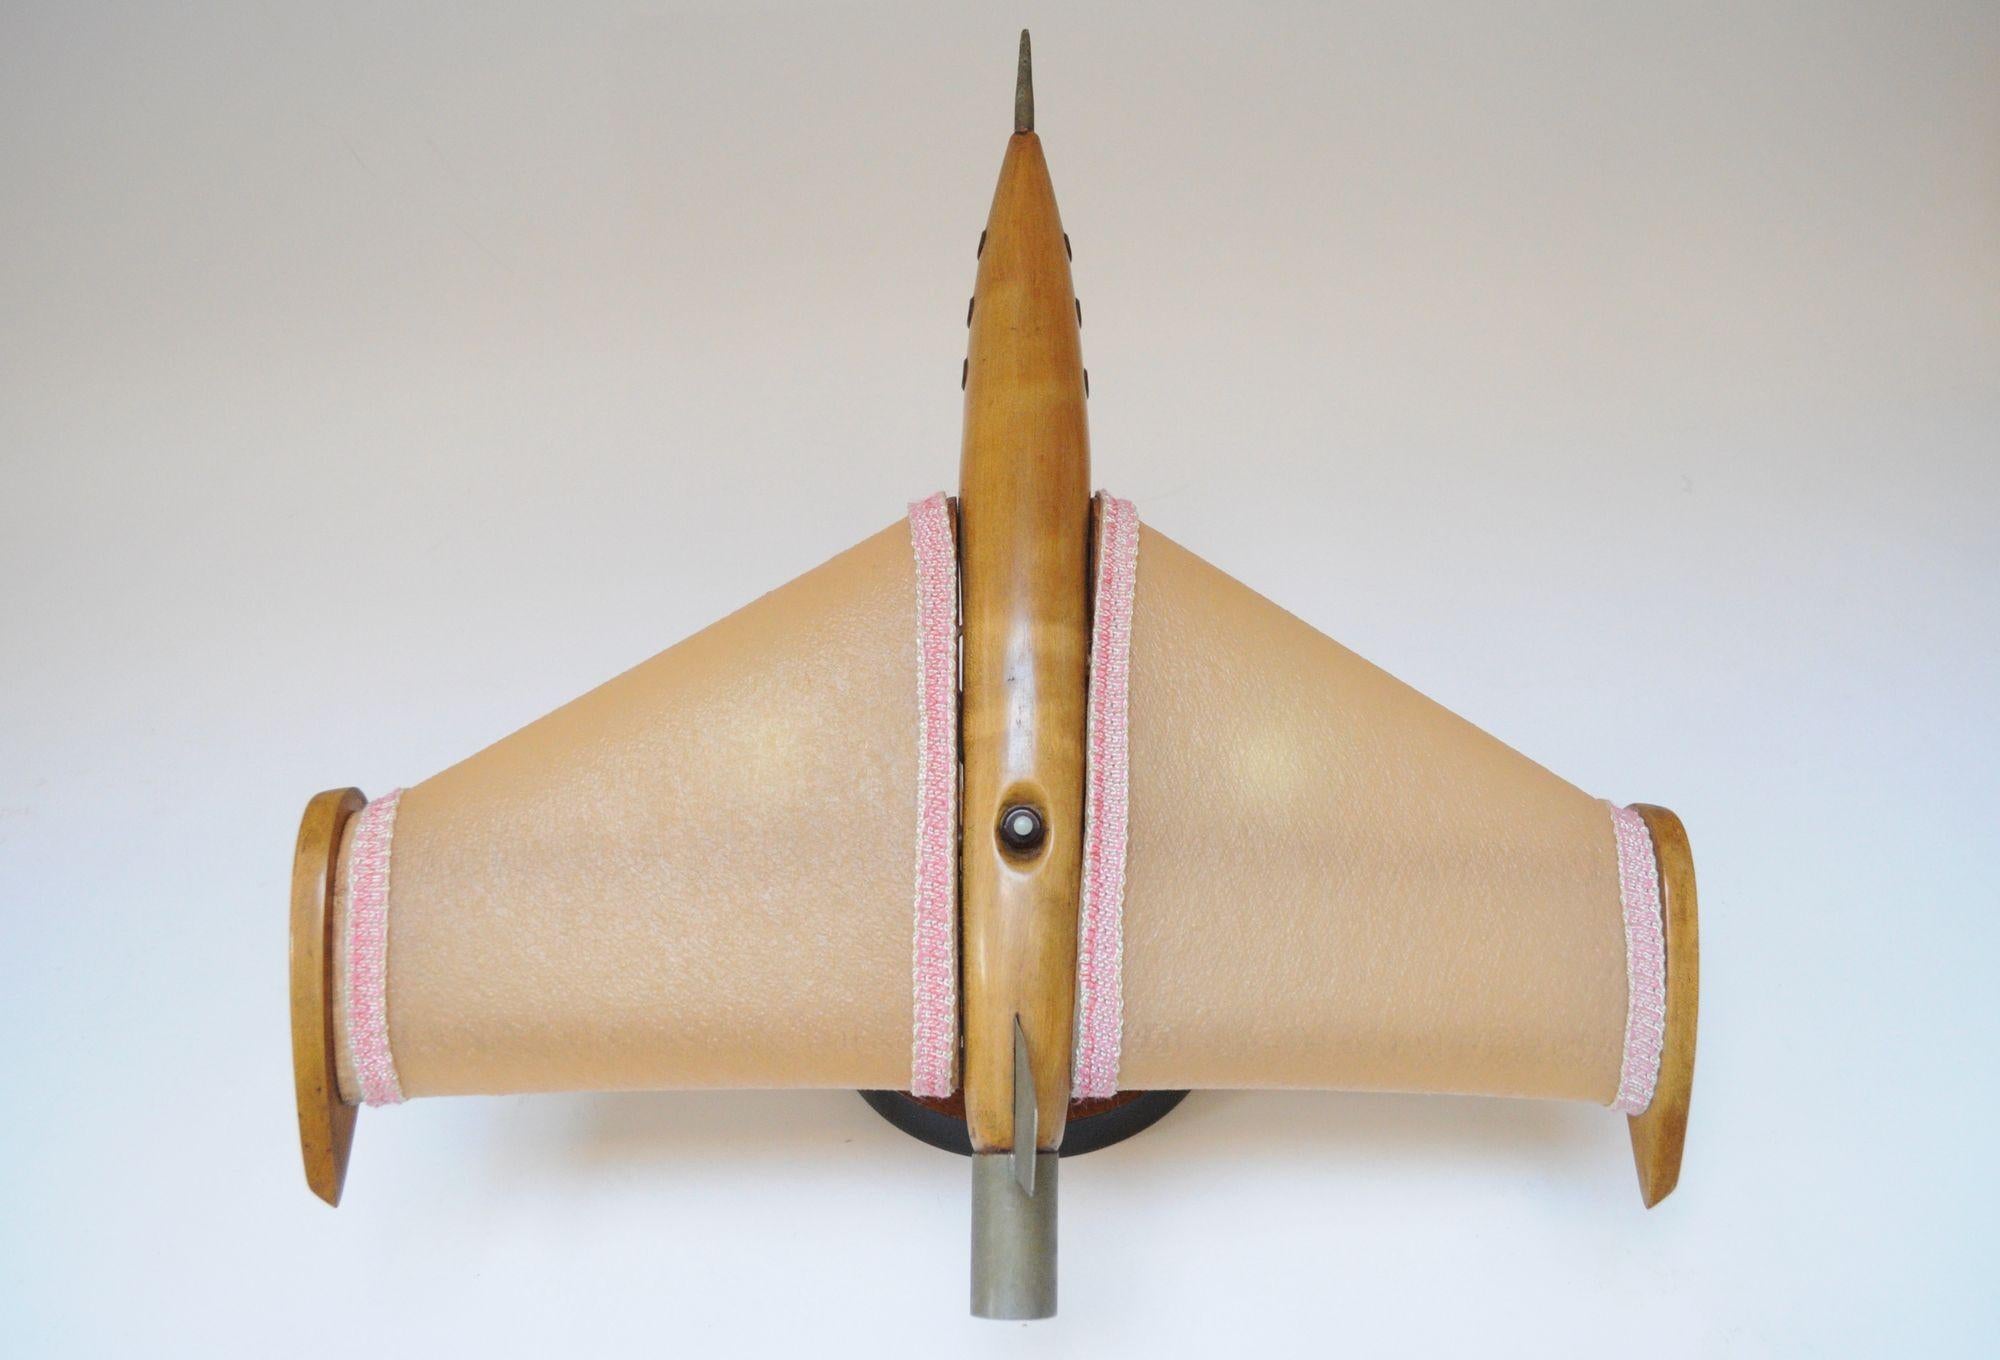 Vintage American Airplane Table Lamp with Illuminated Wings In Good Condition For Sale In Brooklyn, NY